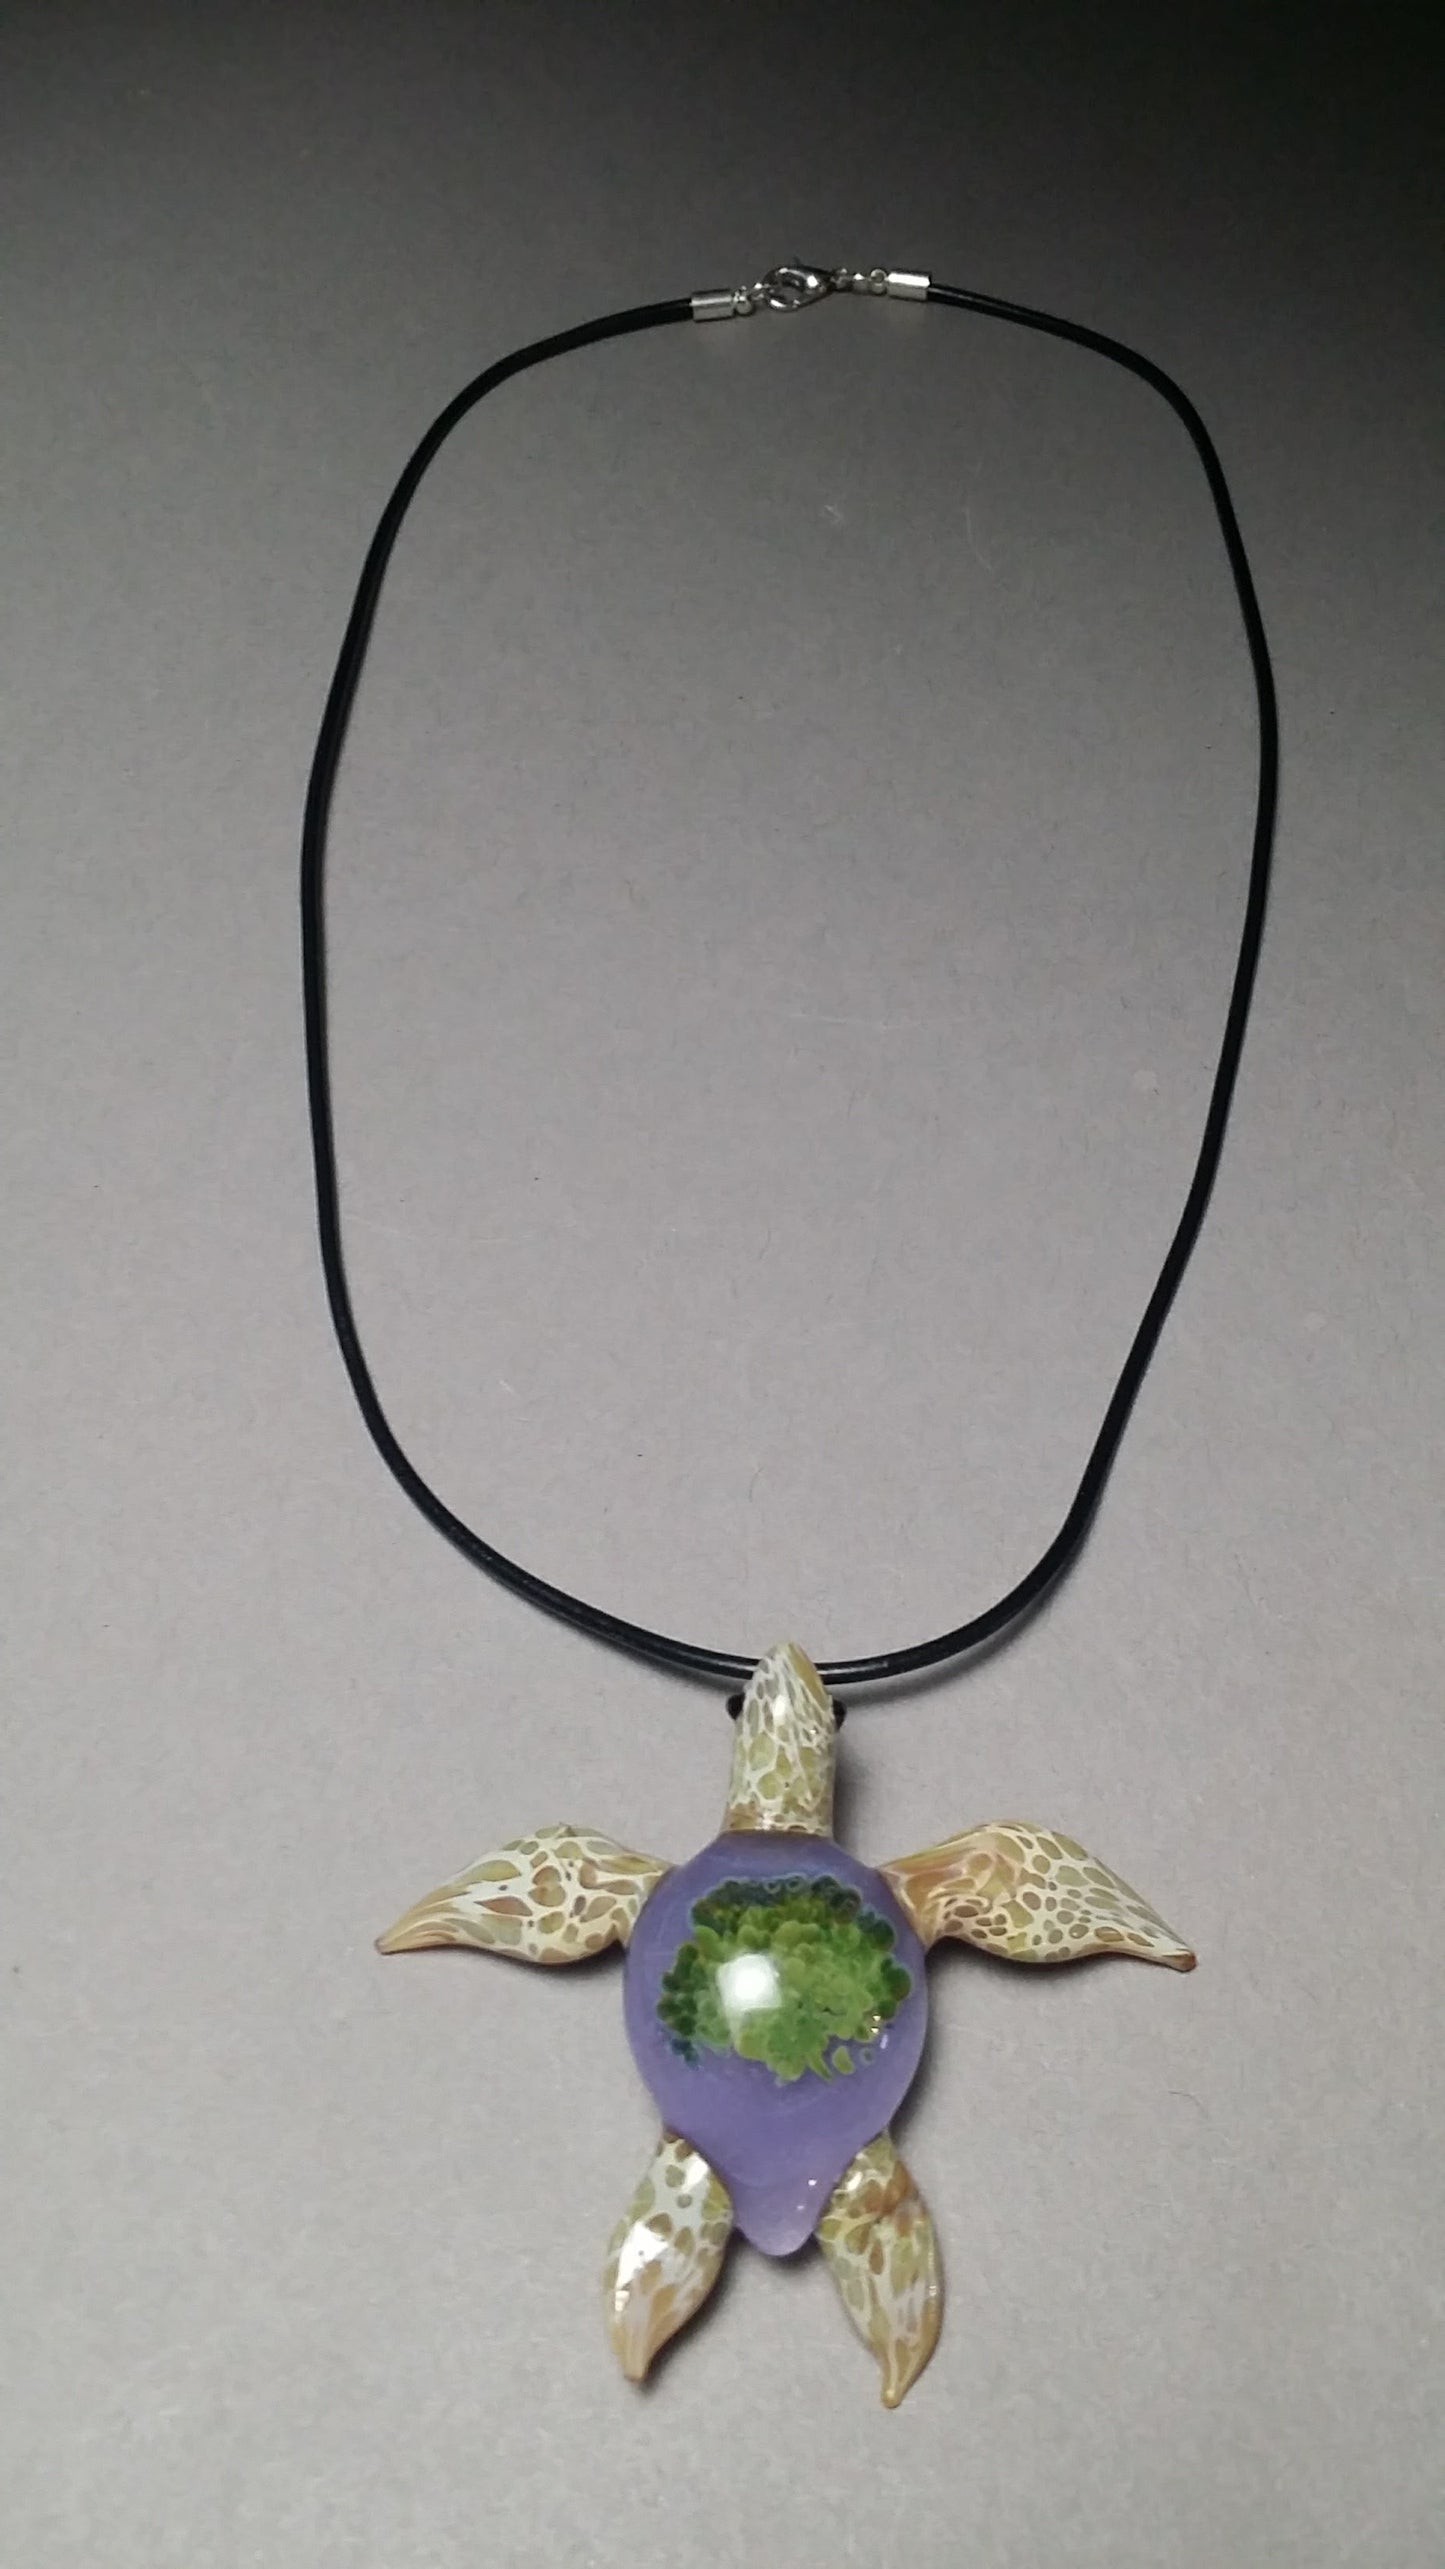 Special edition periwinkle background with green anemones in a beach blonde glass sea turtle pendant - GLASSnFIRE